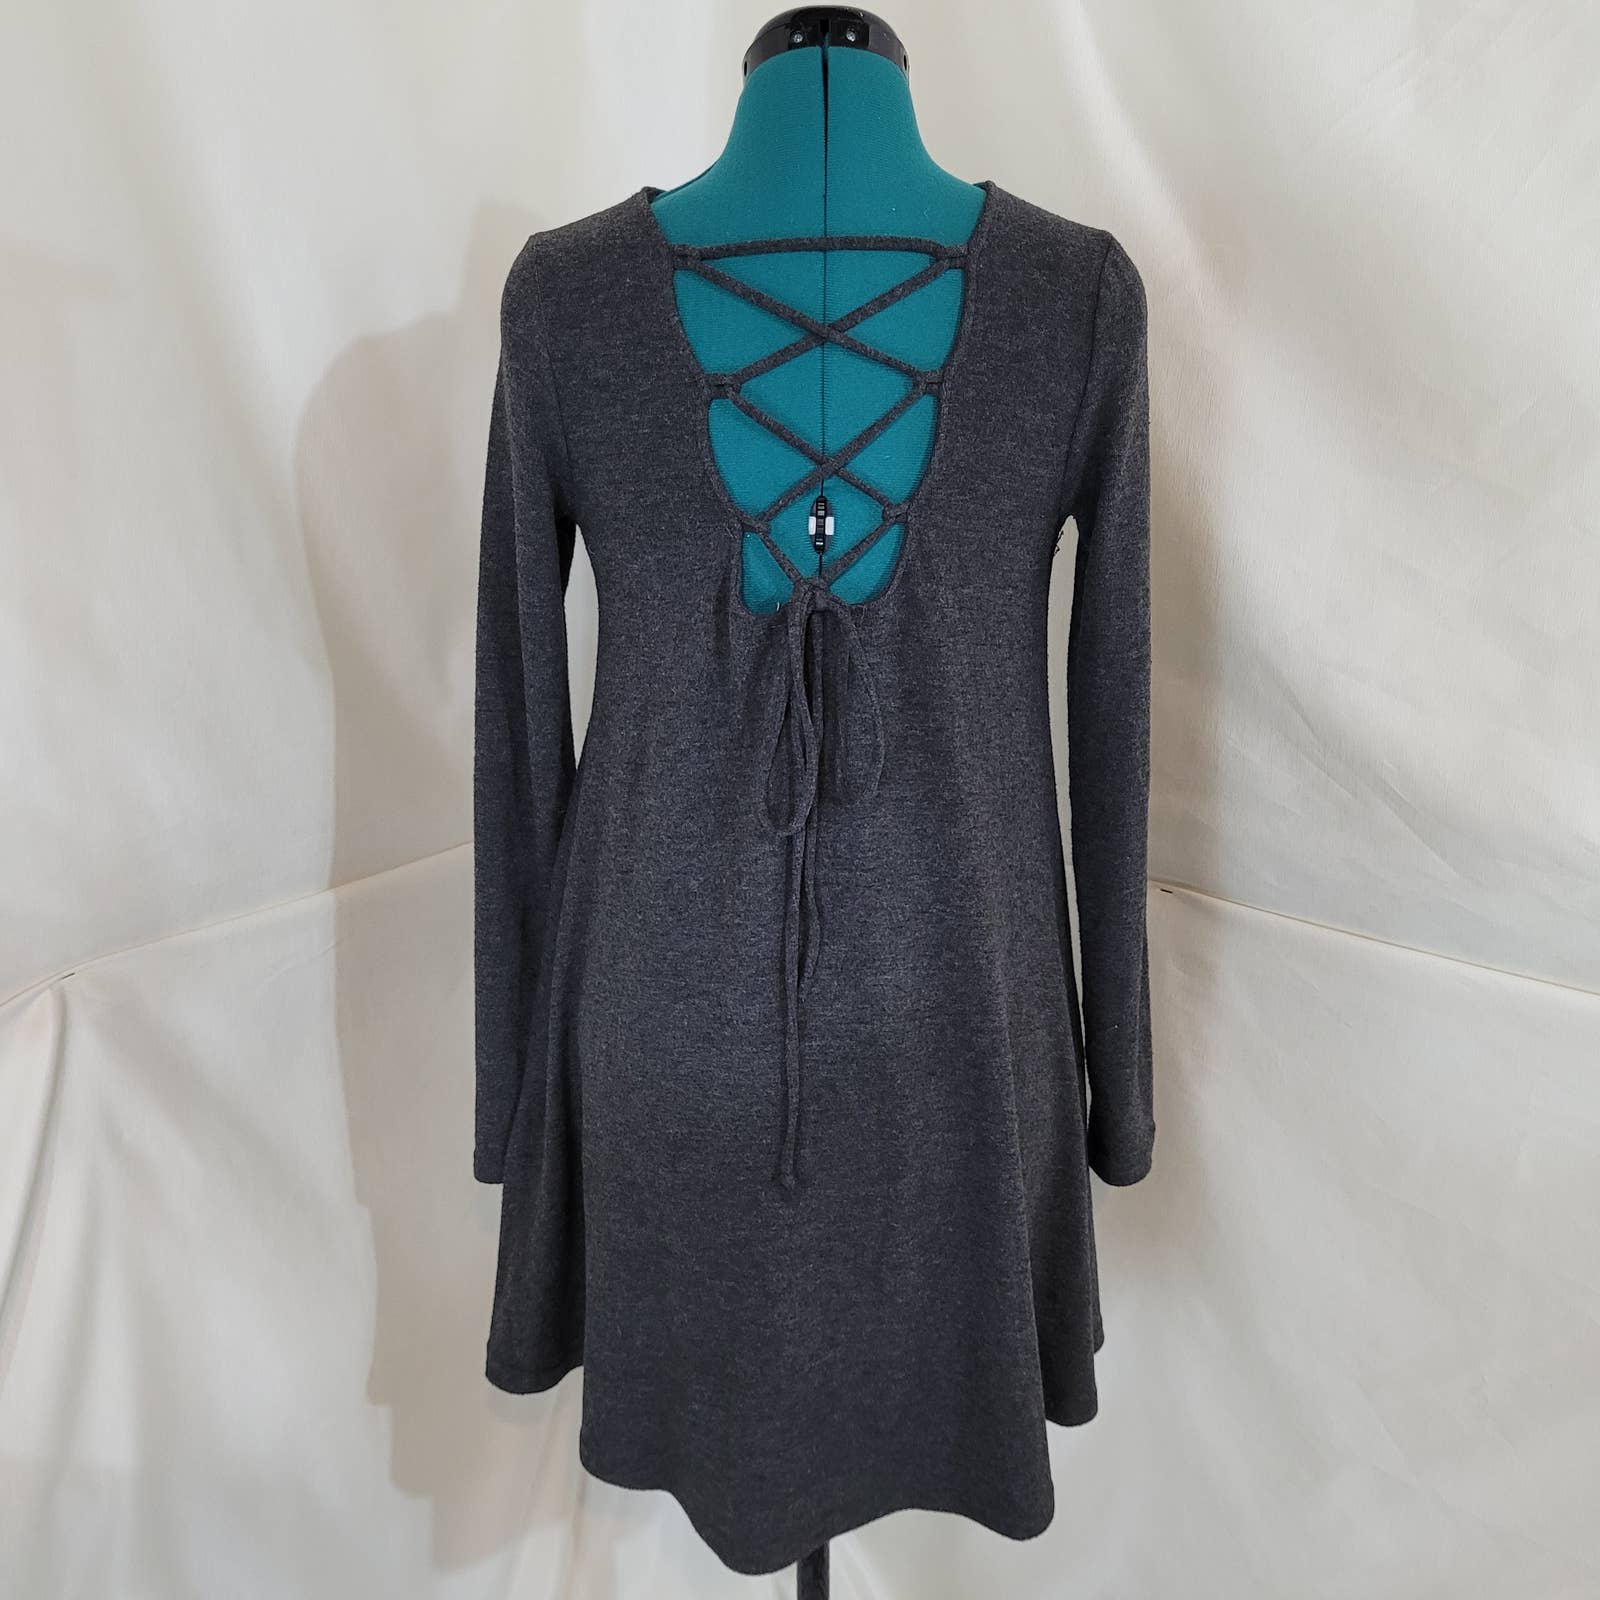 Black Swan Gray Sweater Dress with Lace Up Back - Size Extra SmallMarkita's ClosetBlack Swan